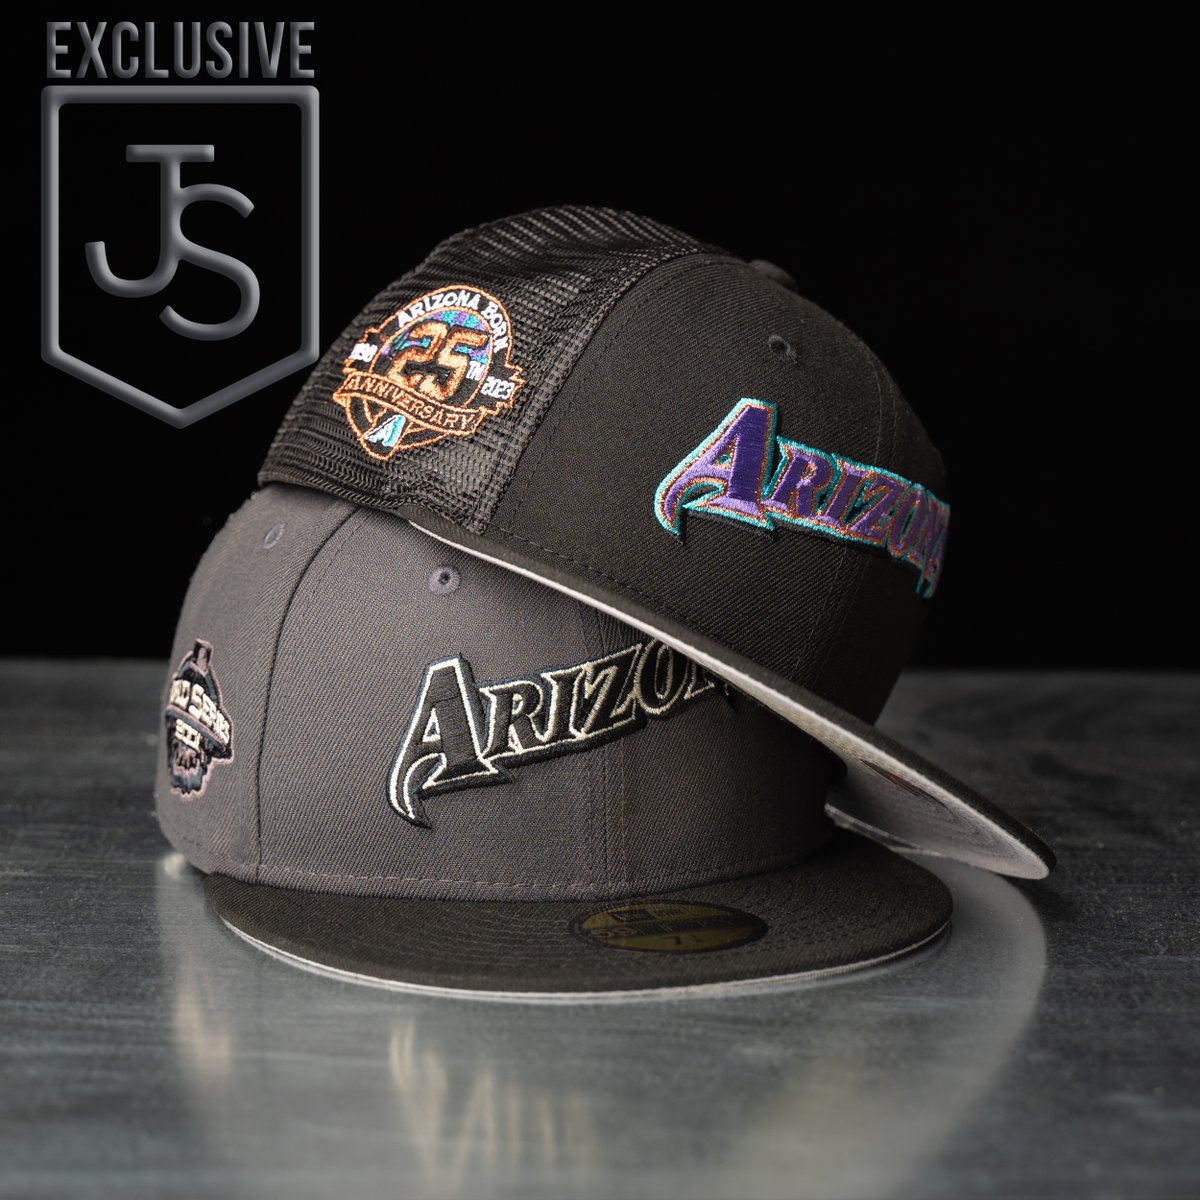 It's a @dbacks summer & fresh from @neweracap we've got new Exclusives for you! Available online now and in-store early next week. #neweracustoms #59fifty #fitted #fittedhats #justsportsexclusive

smily.bio/justsportsaz